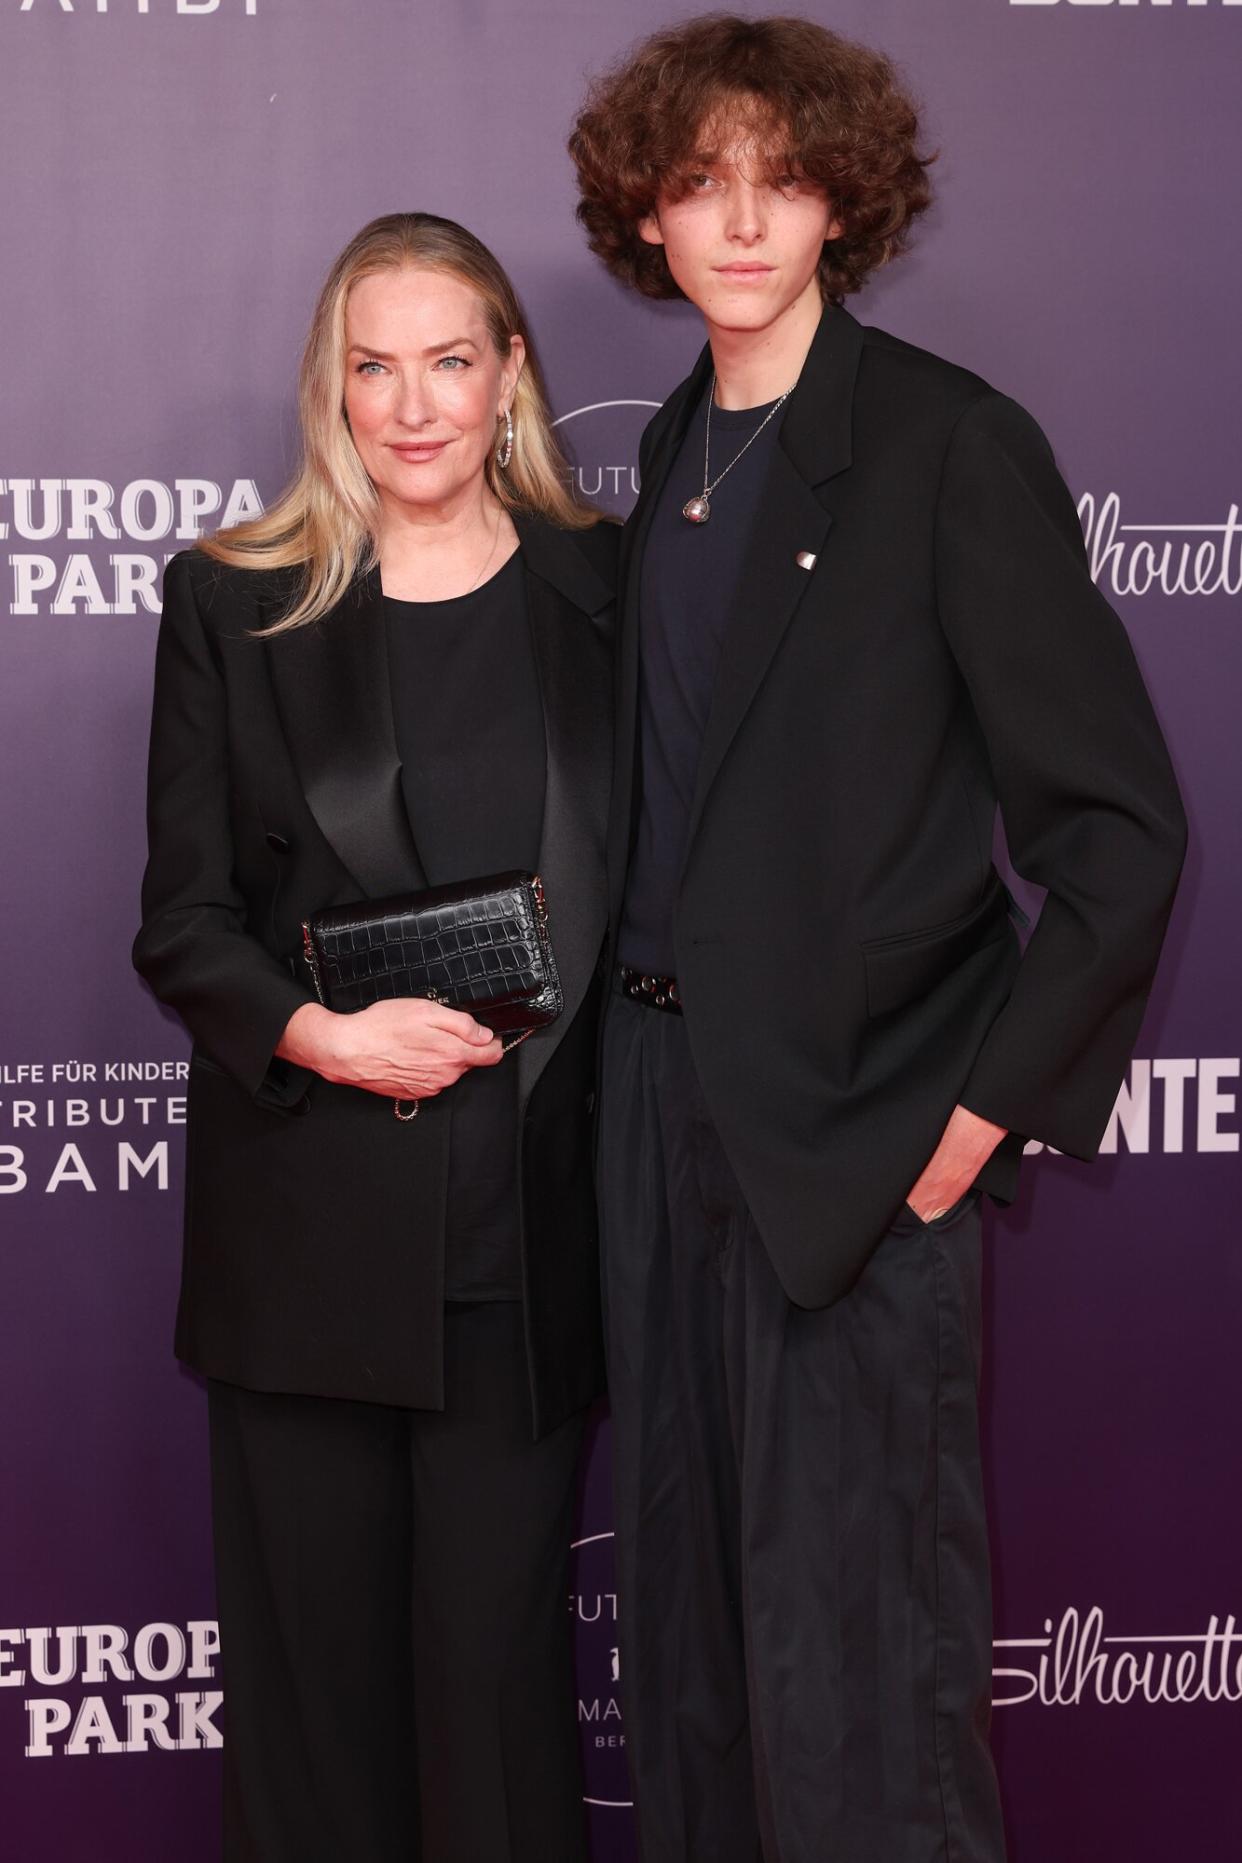 Tatjana Patitz and Jonah Patitz attend the Tribute to Bambi 2022 at Hotel Berlin Central District on October 5, 2022 in Berlin, Germany.